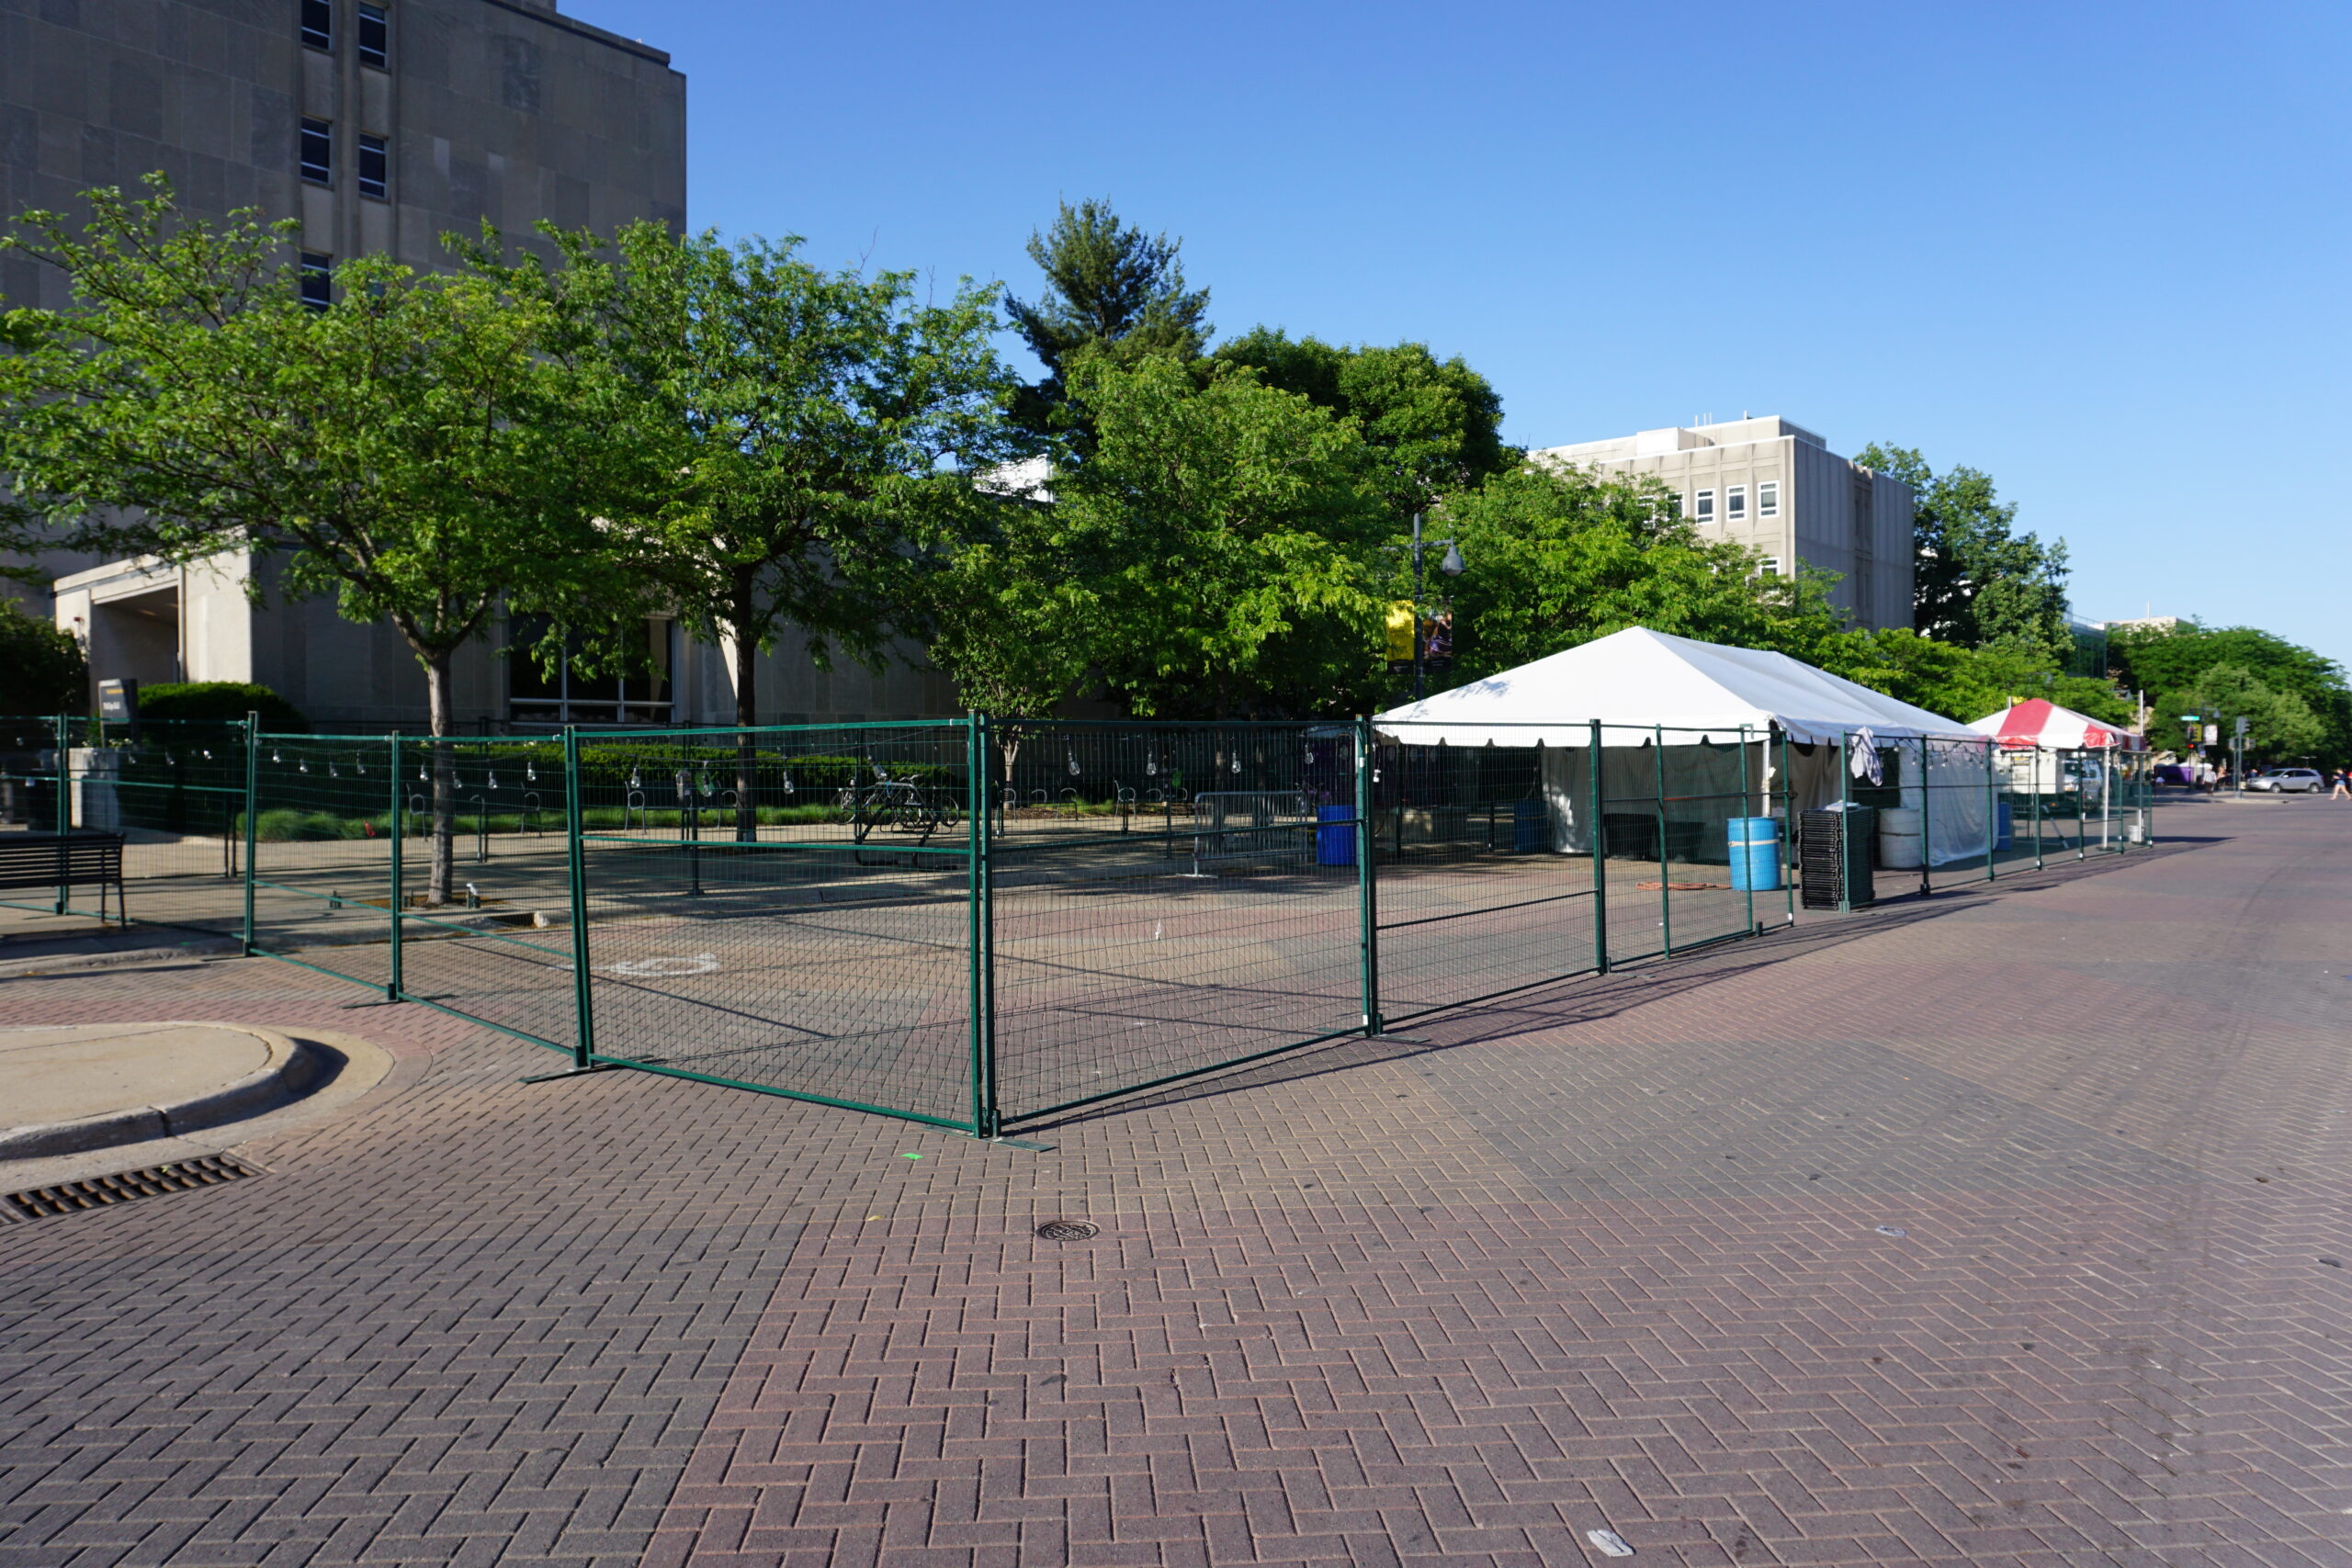 Setup of the beer garden for the 2016 Iowa Arts Fest setup